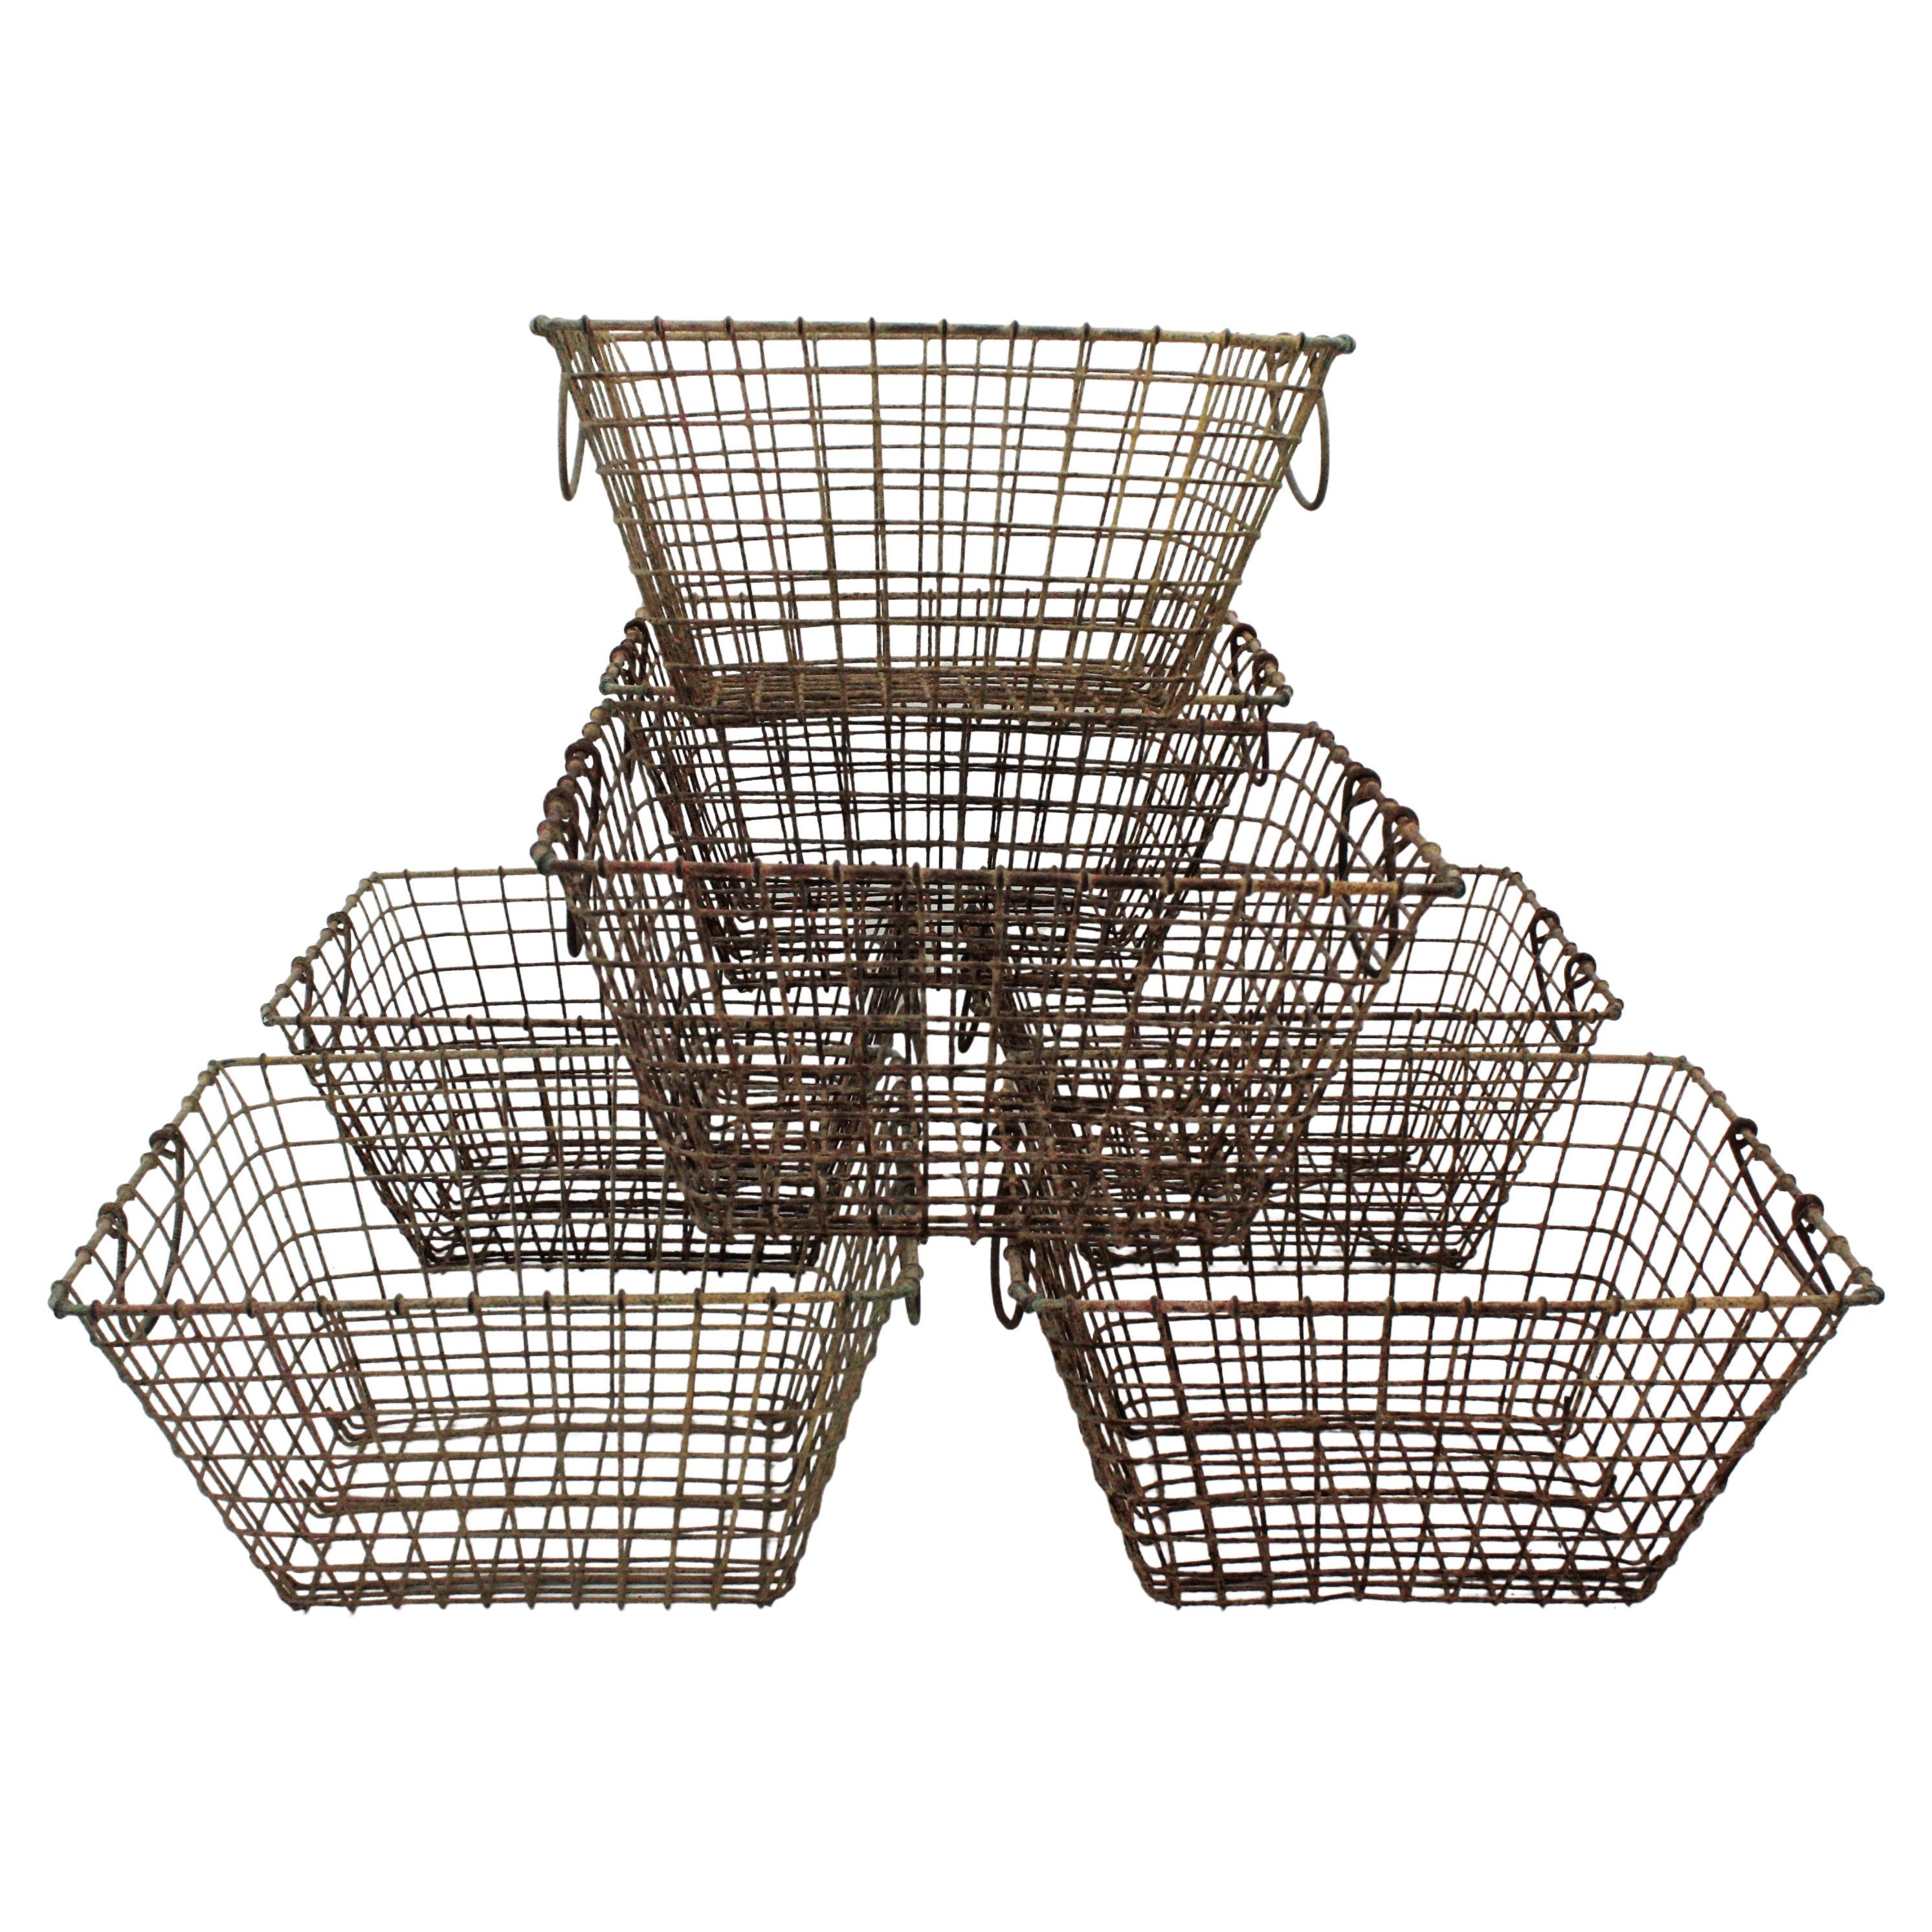 Set of Seven Coquillage Oysters Baskets in Iron Wire